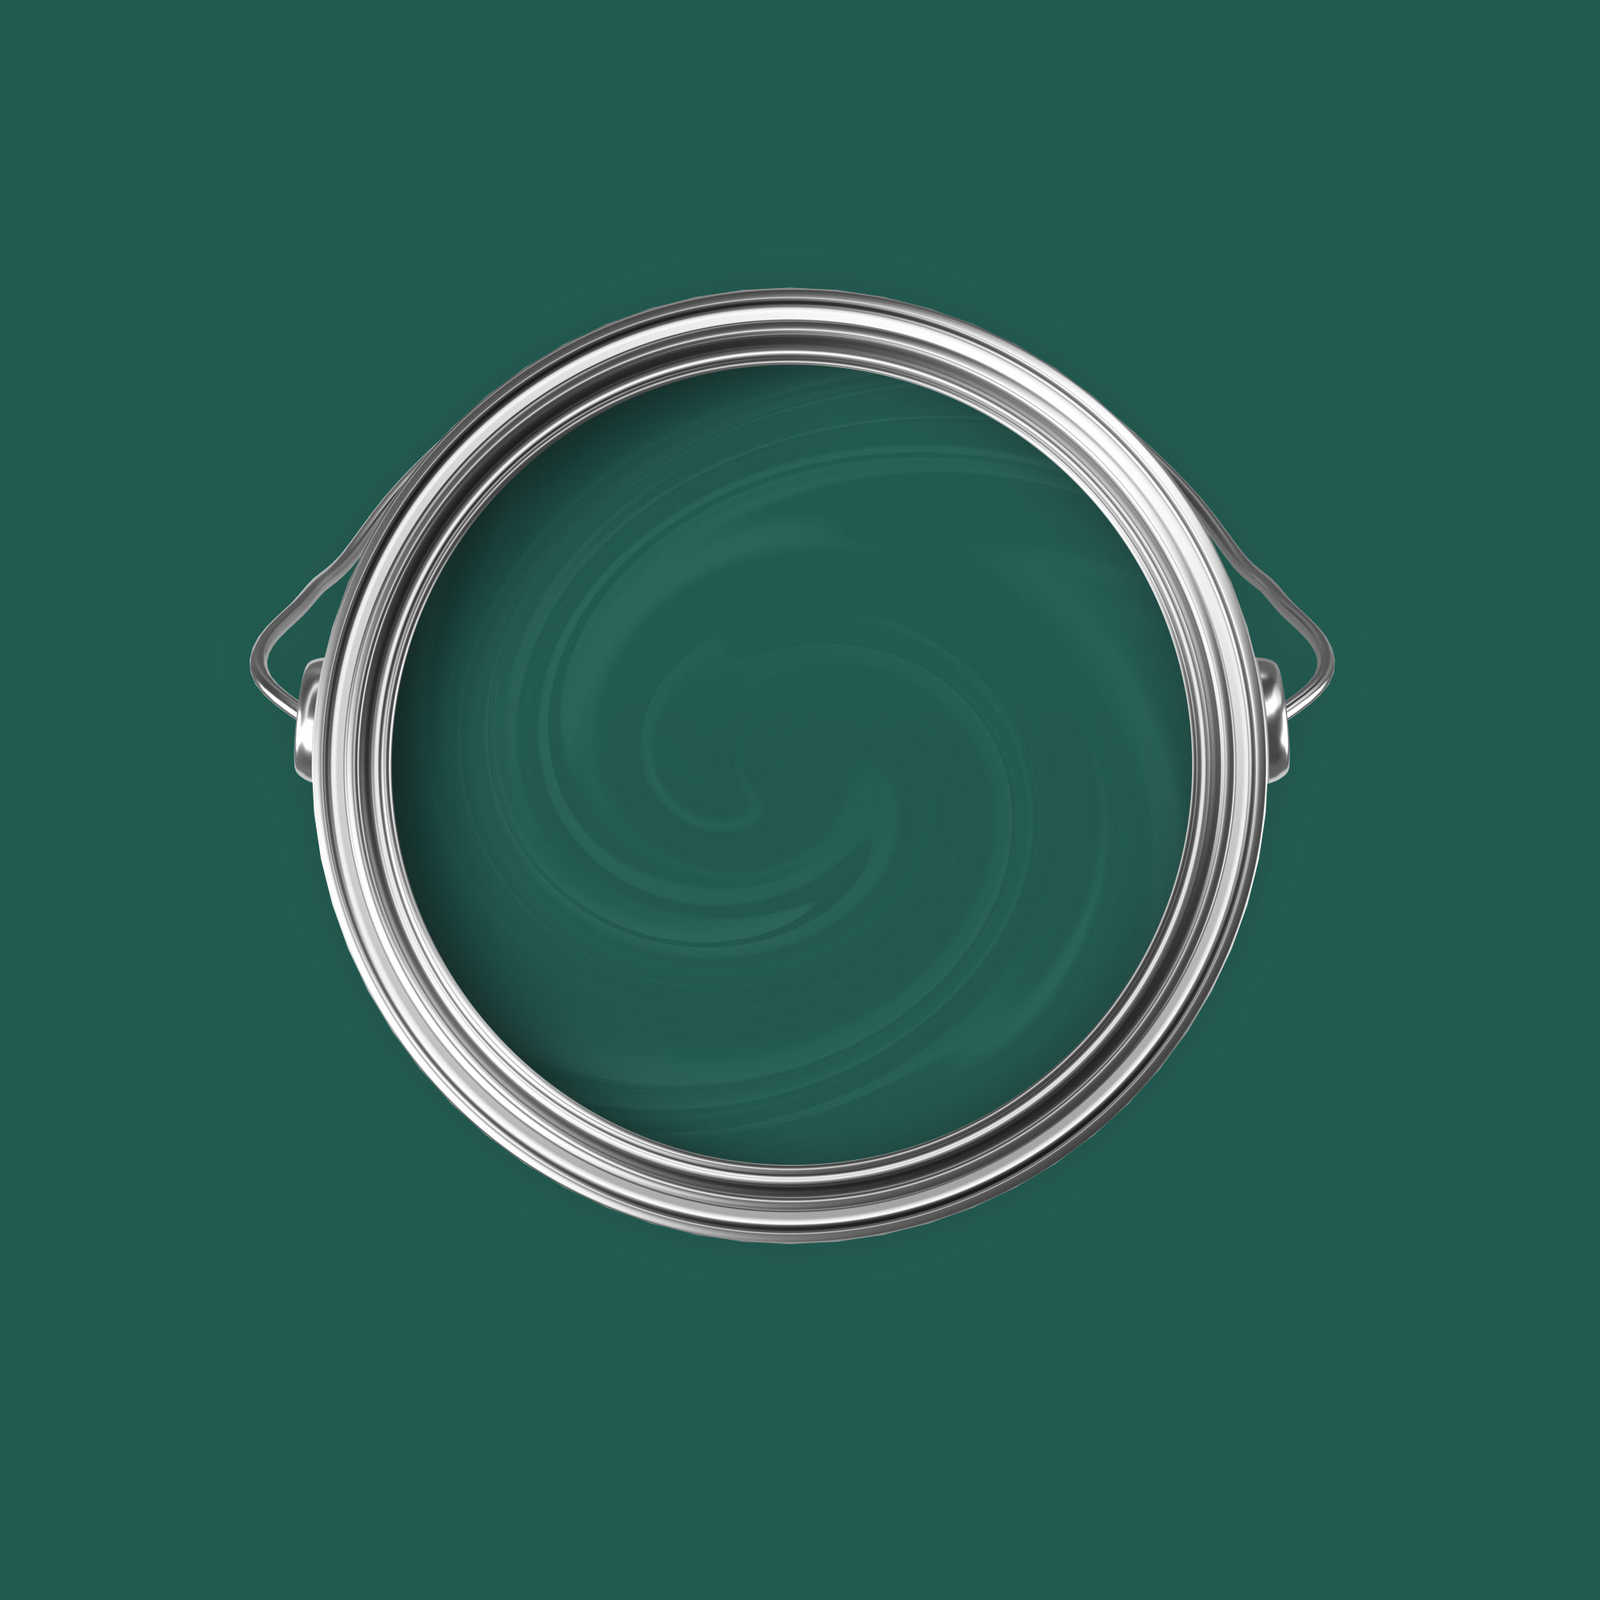             Premium Wall Paint gorgeous emerald green »Expressive Emerald« NW412 – 5 litre
        